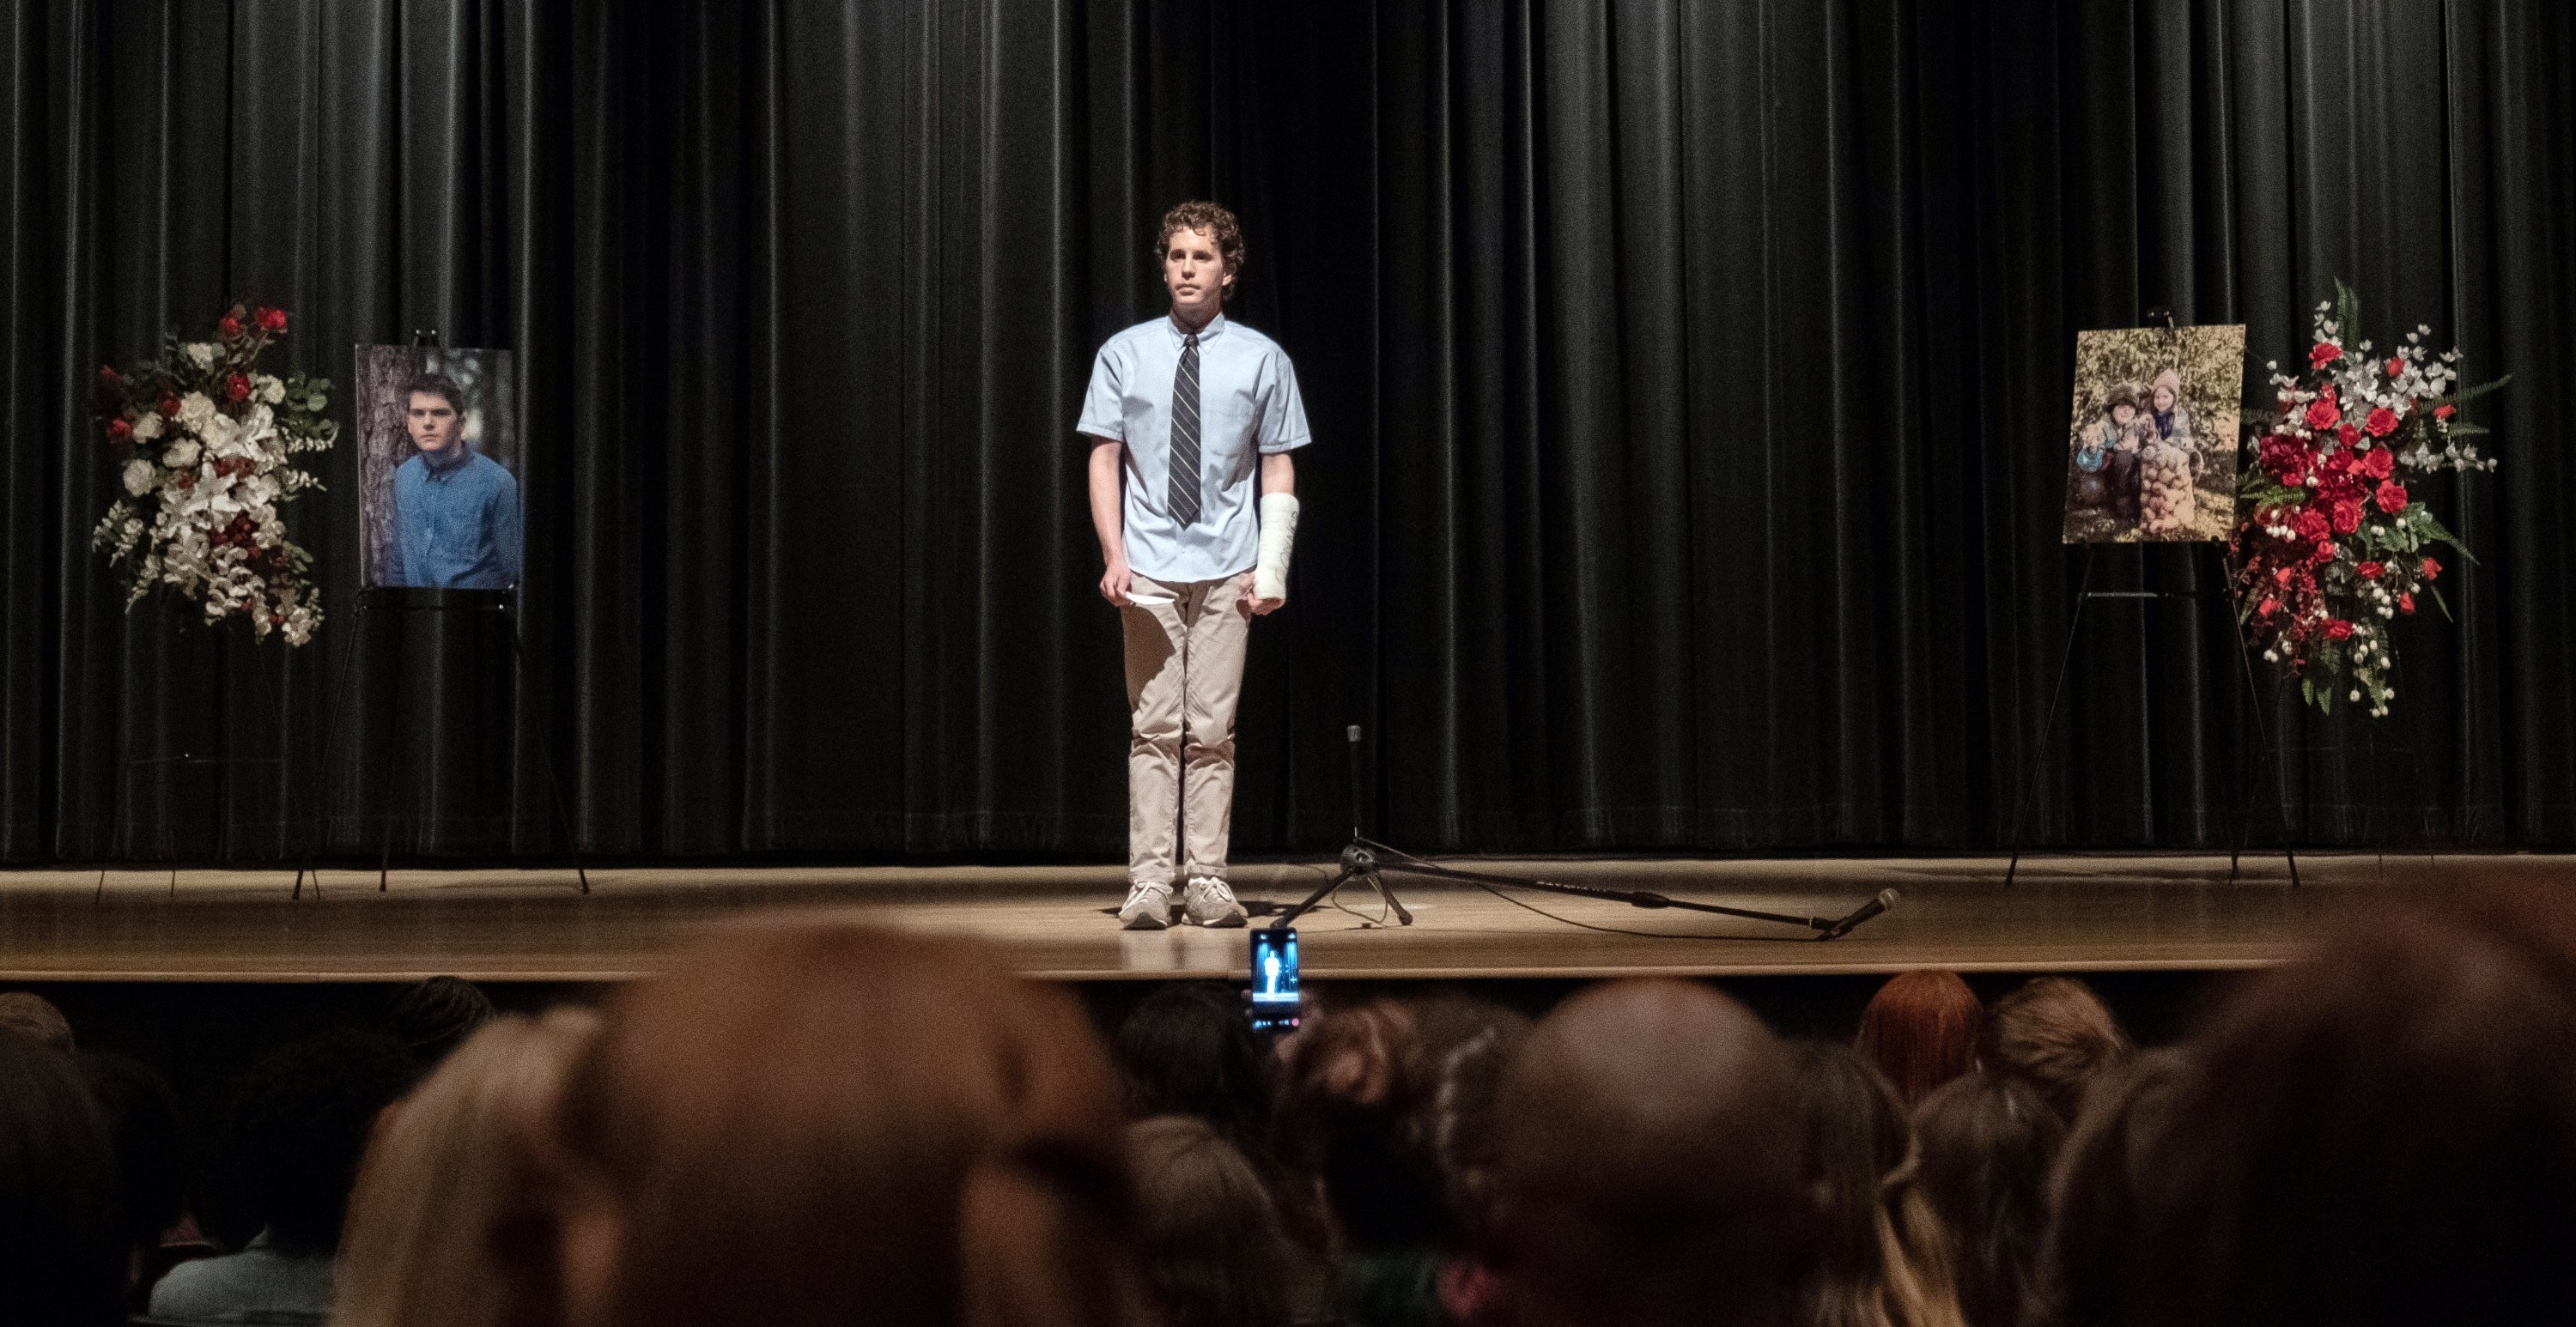 Evan Hansen standing at the mic in a school auditorium with pictures of a fellow student who has died off to the sides